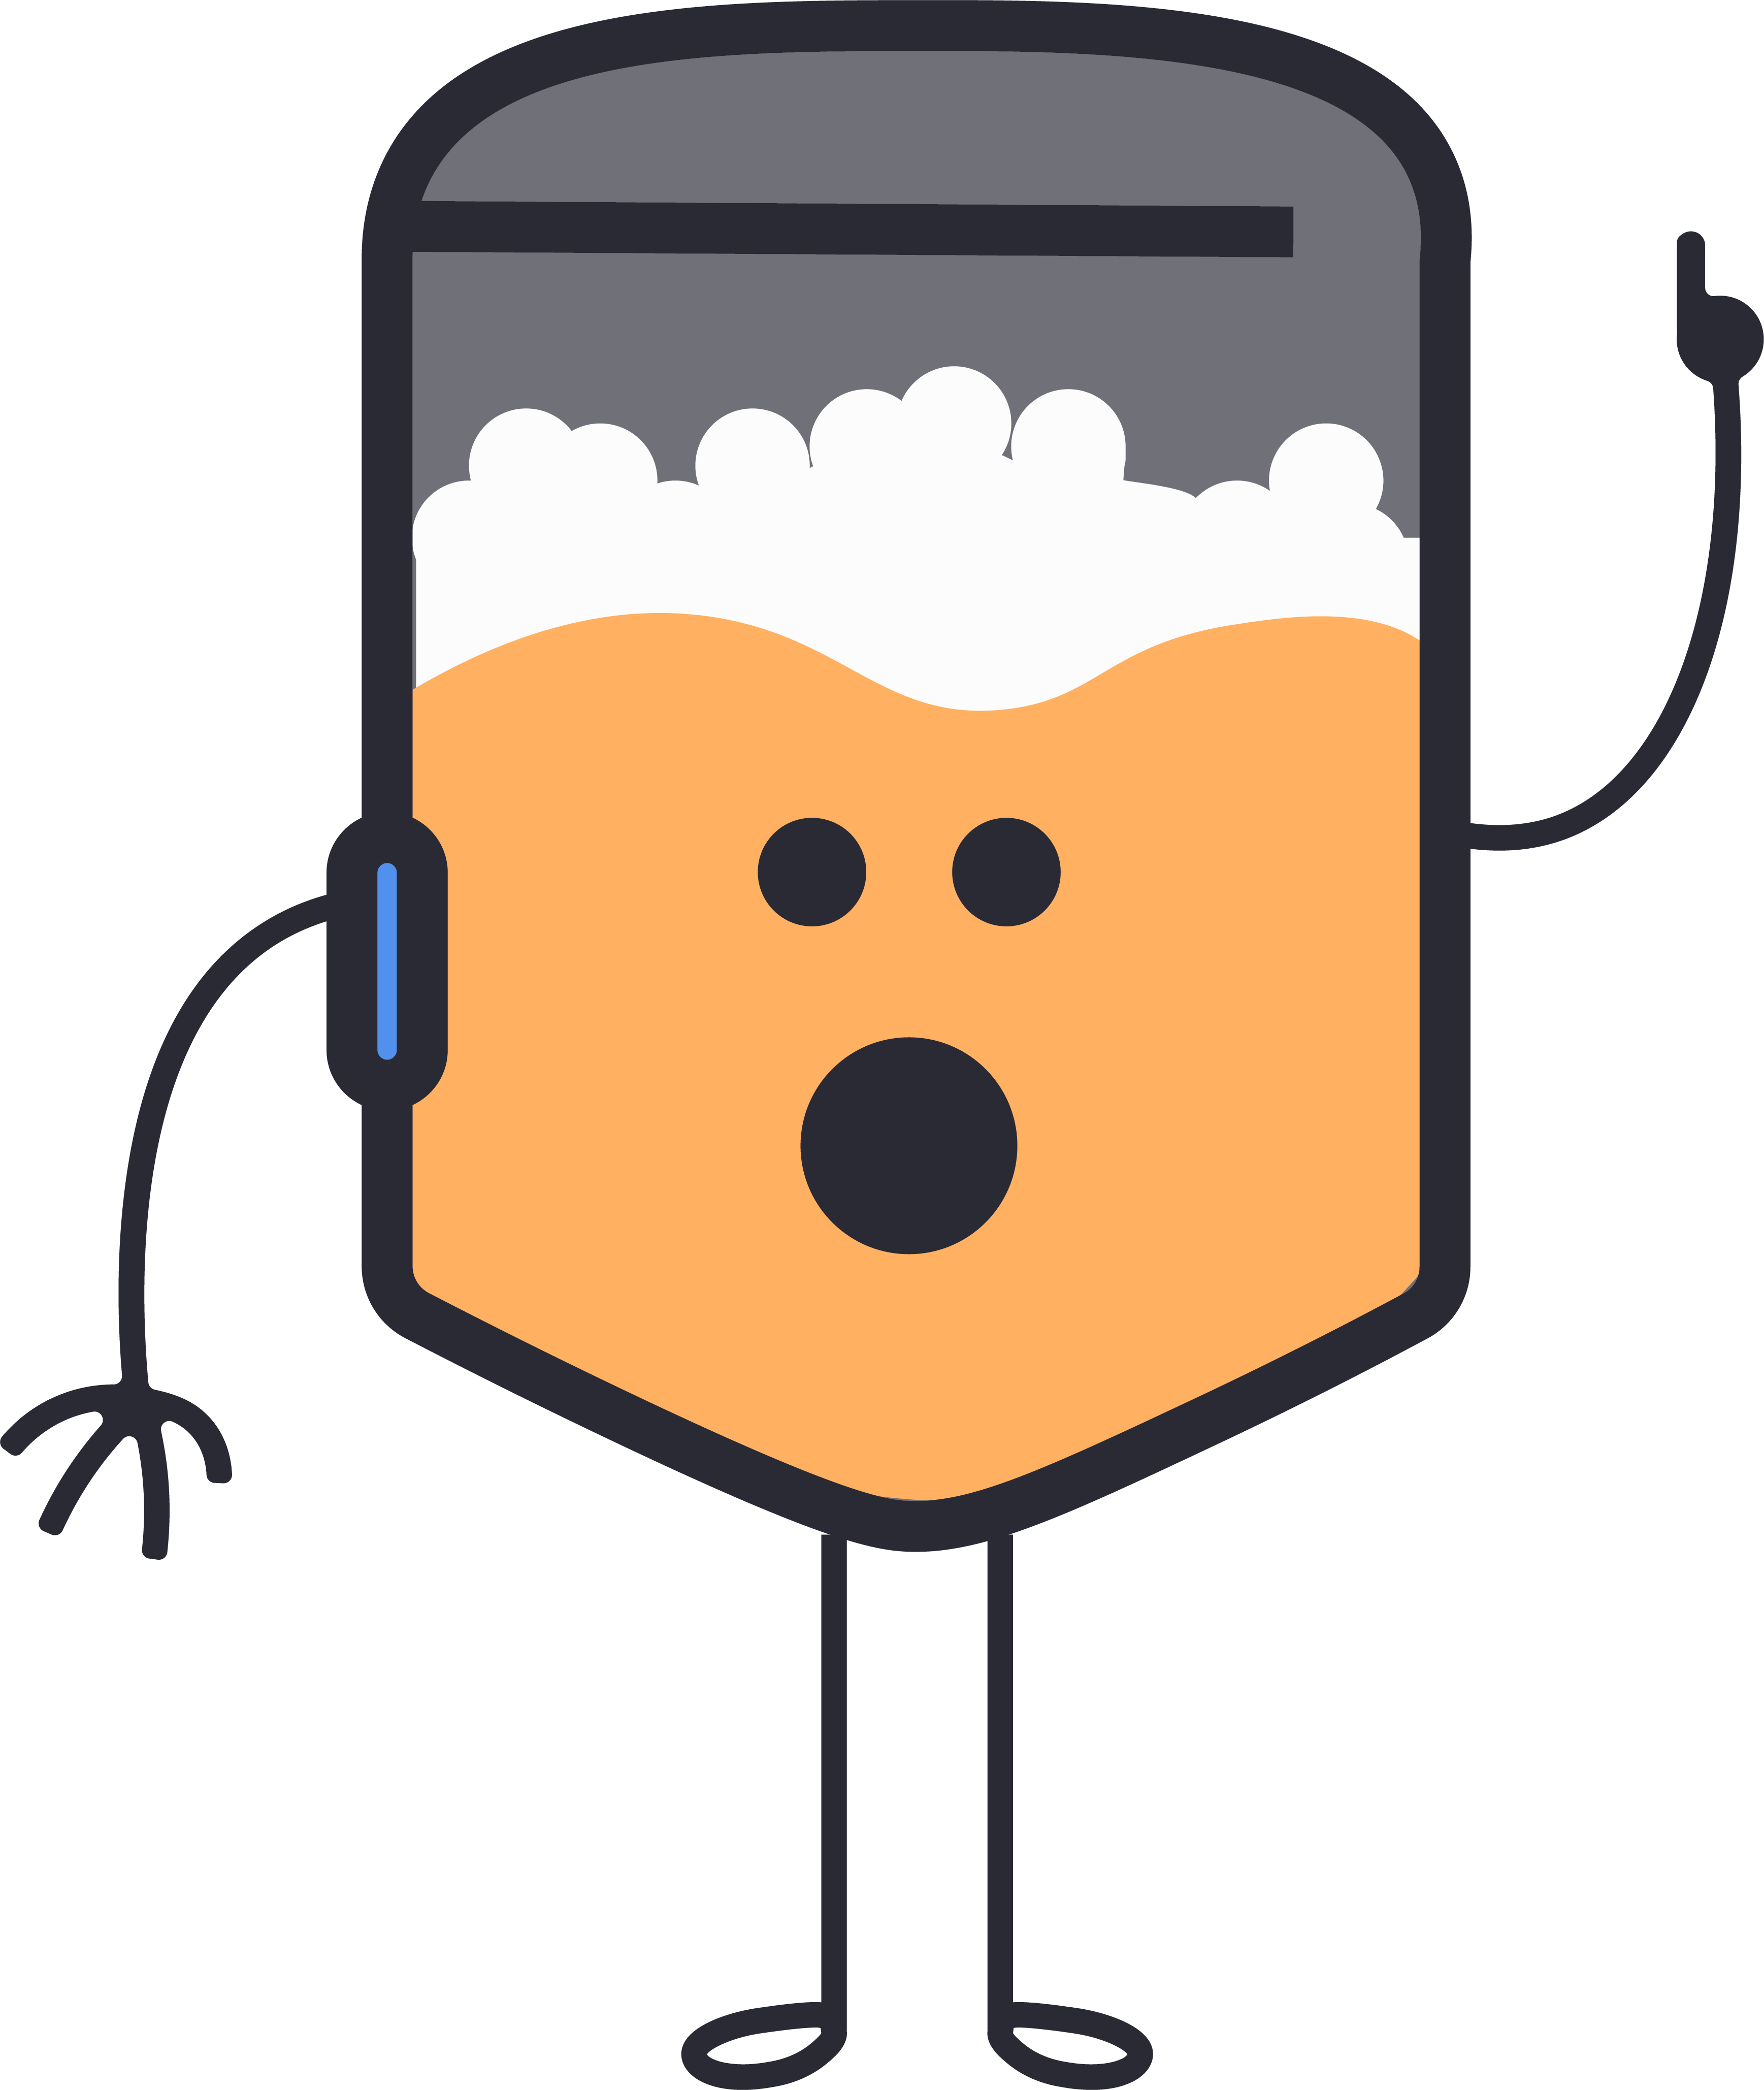 This icon shows a brewing tank partially transformed into a stick-figure character. The character looks surprised and as if he has a question, with a finger up in the air as if getting ready to ask.